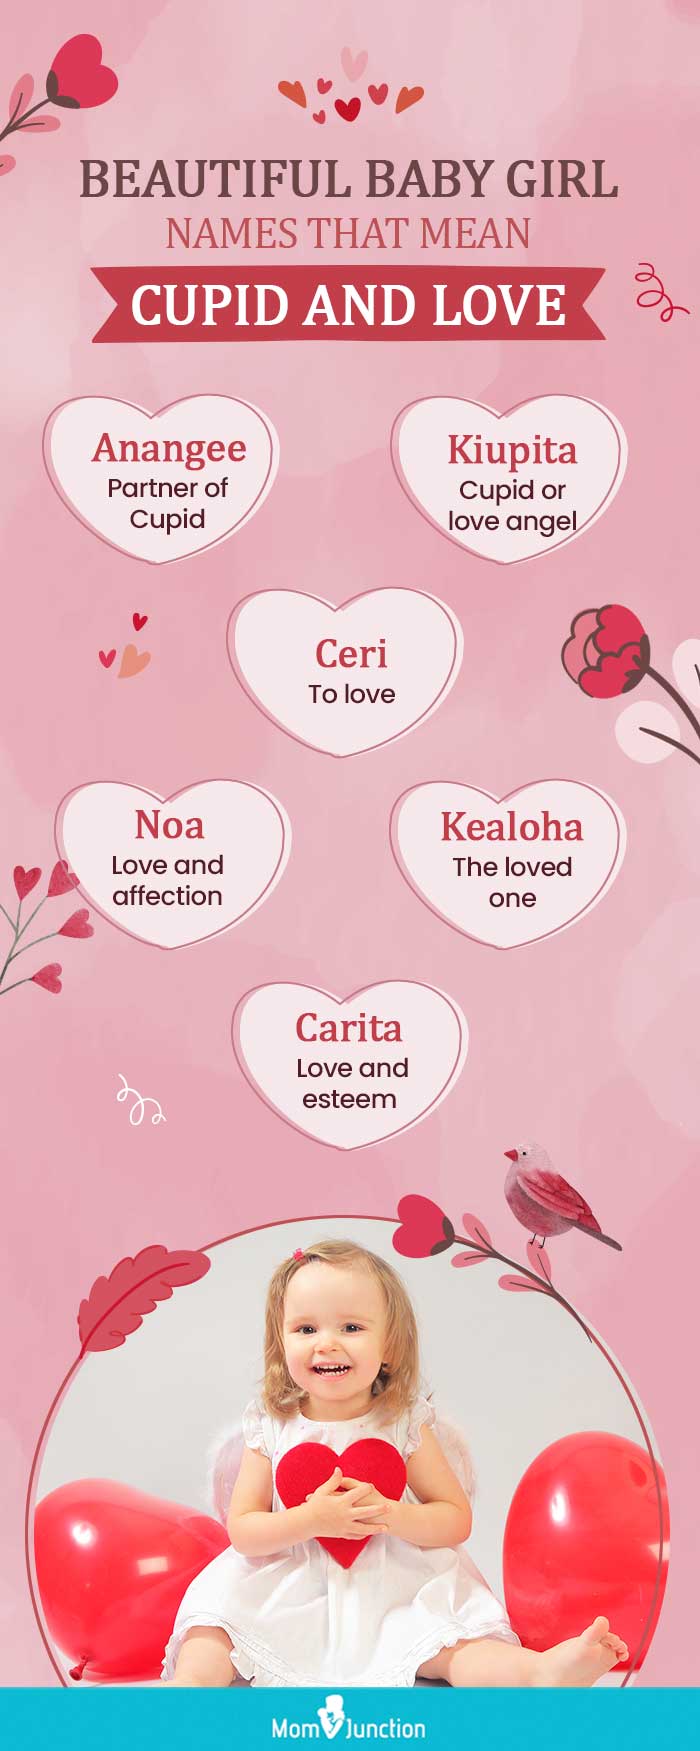 Beautiful Baby Girl Names That Mean Cupid And Love (infographic)